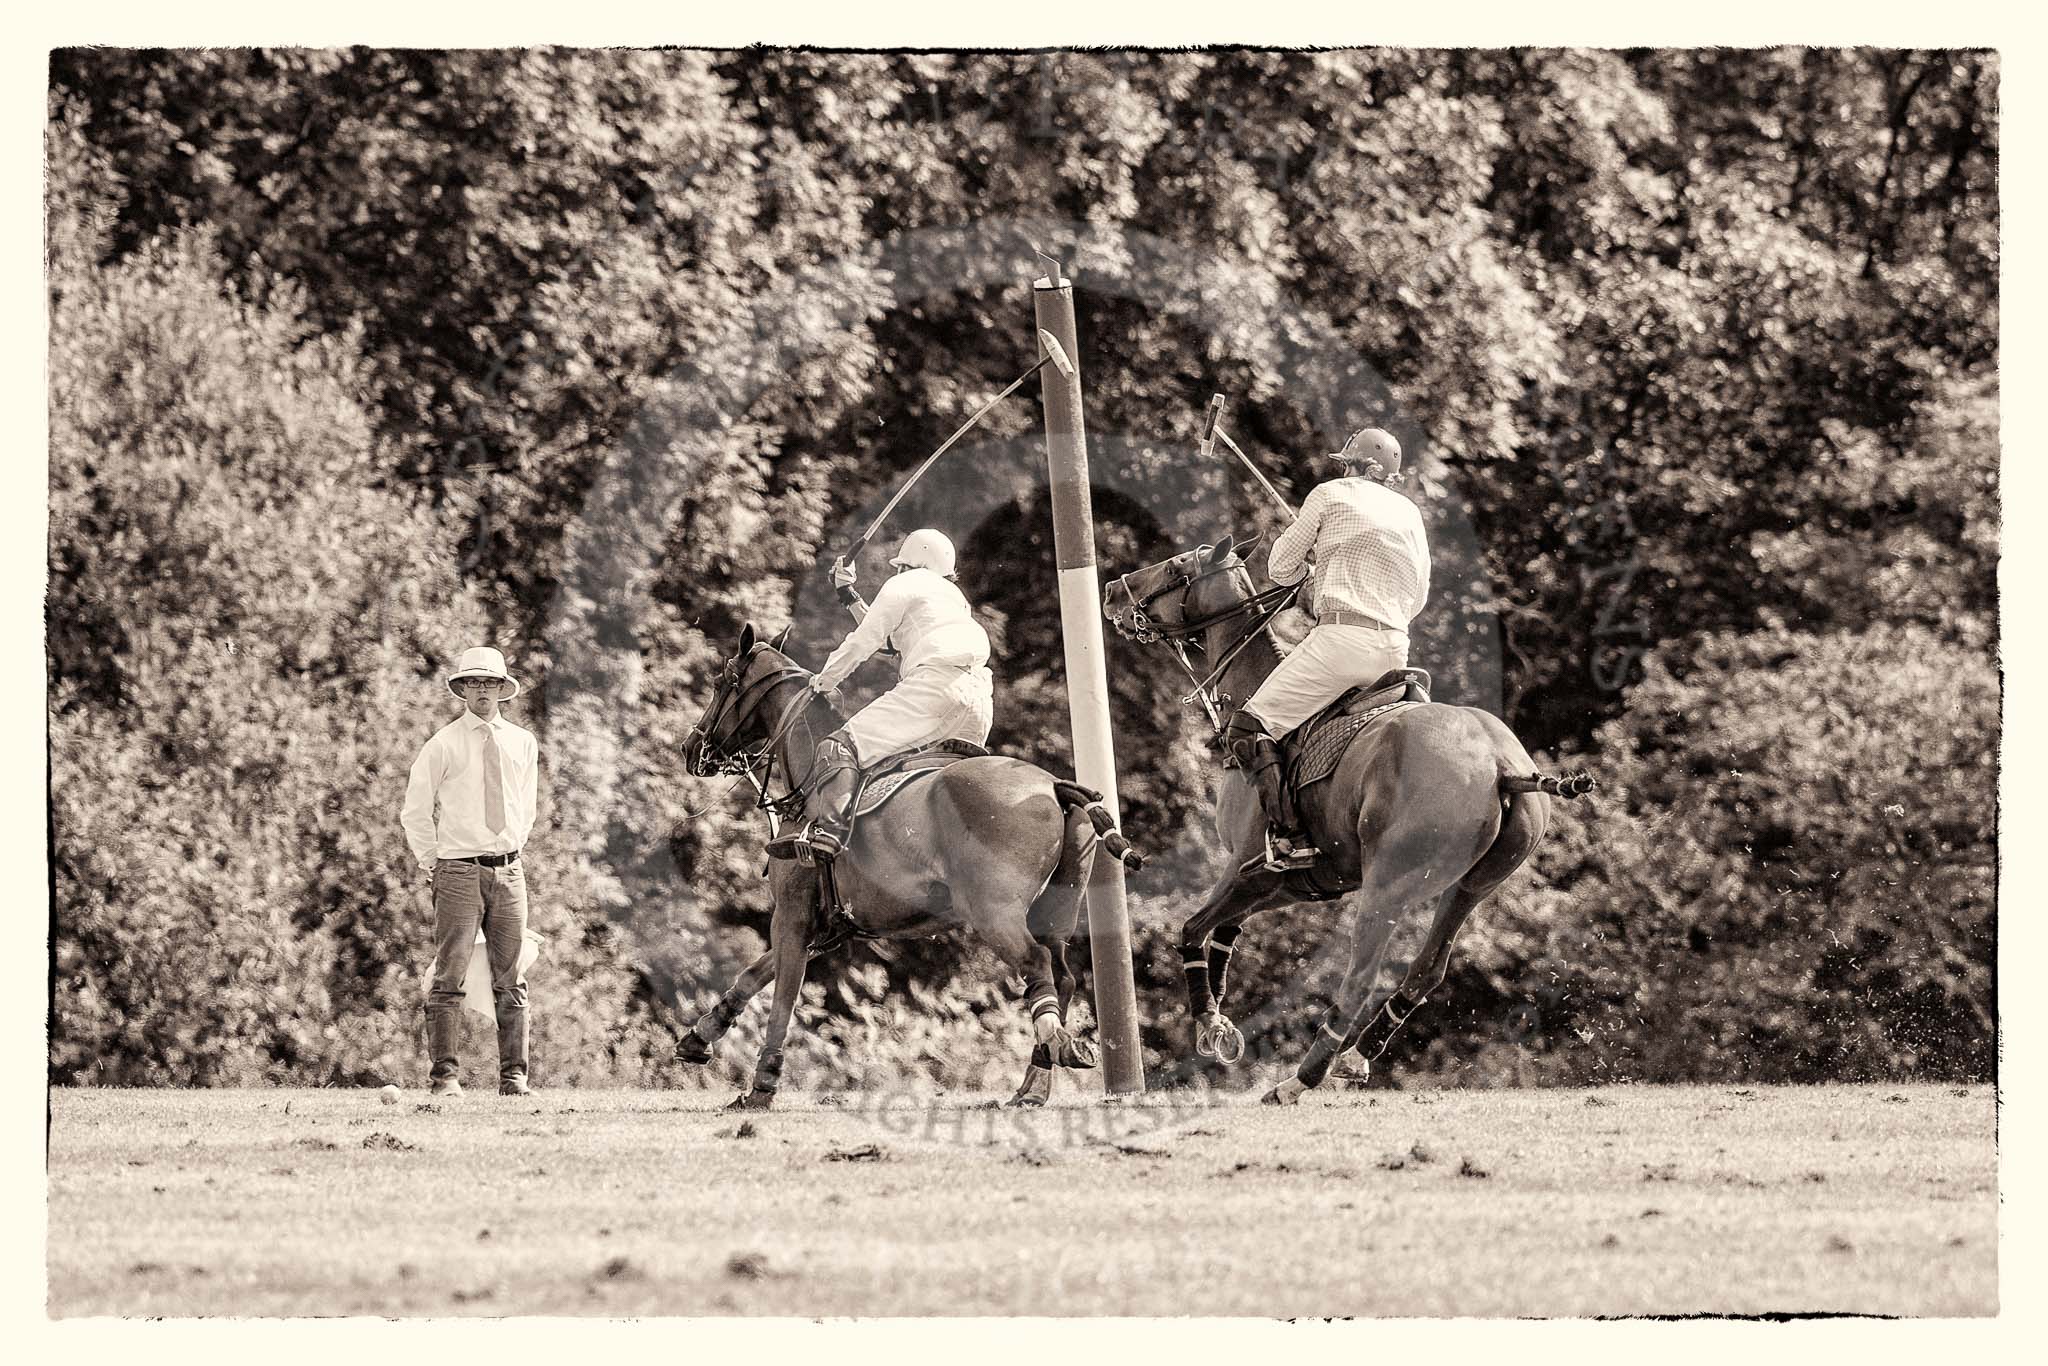 7th Heritage Polo Cup finals: Pepe Riglos saving a goal with a back shot..
Hurtwood Park Polo Club,
Ewhurst Green,
Surrey,
United Kingdom,
on 05 August 2012 at 15:44, image #191